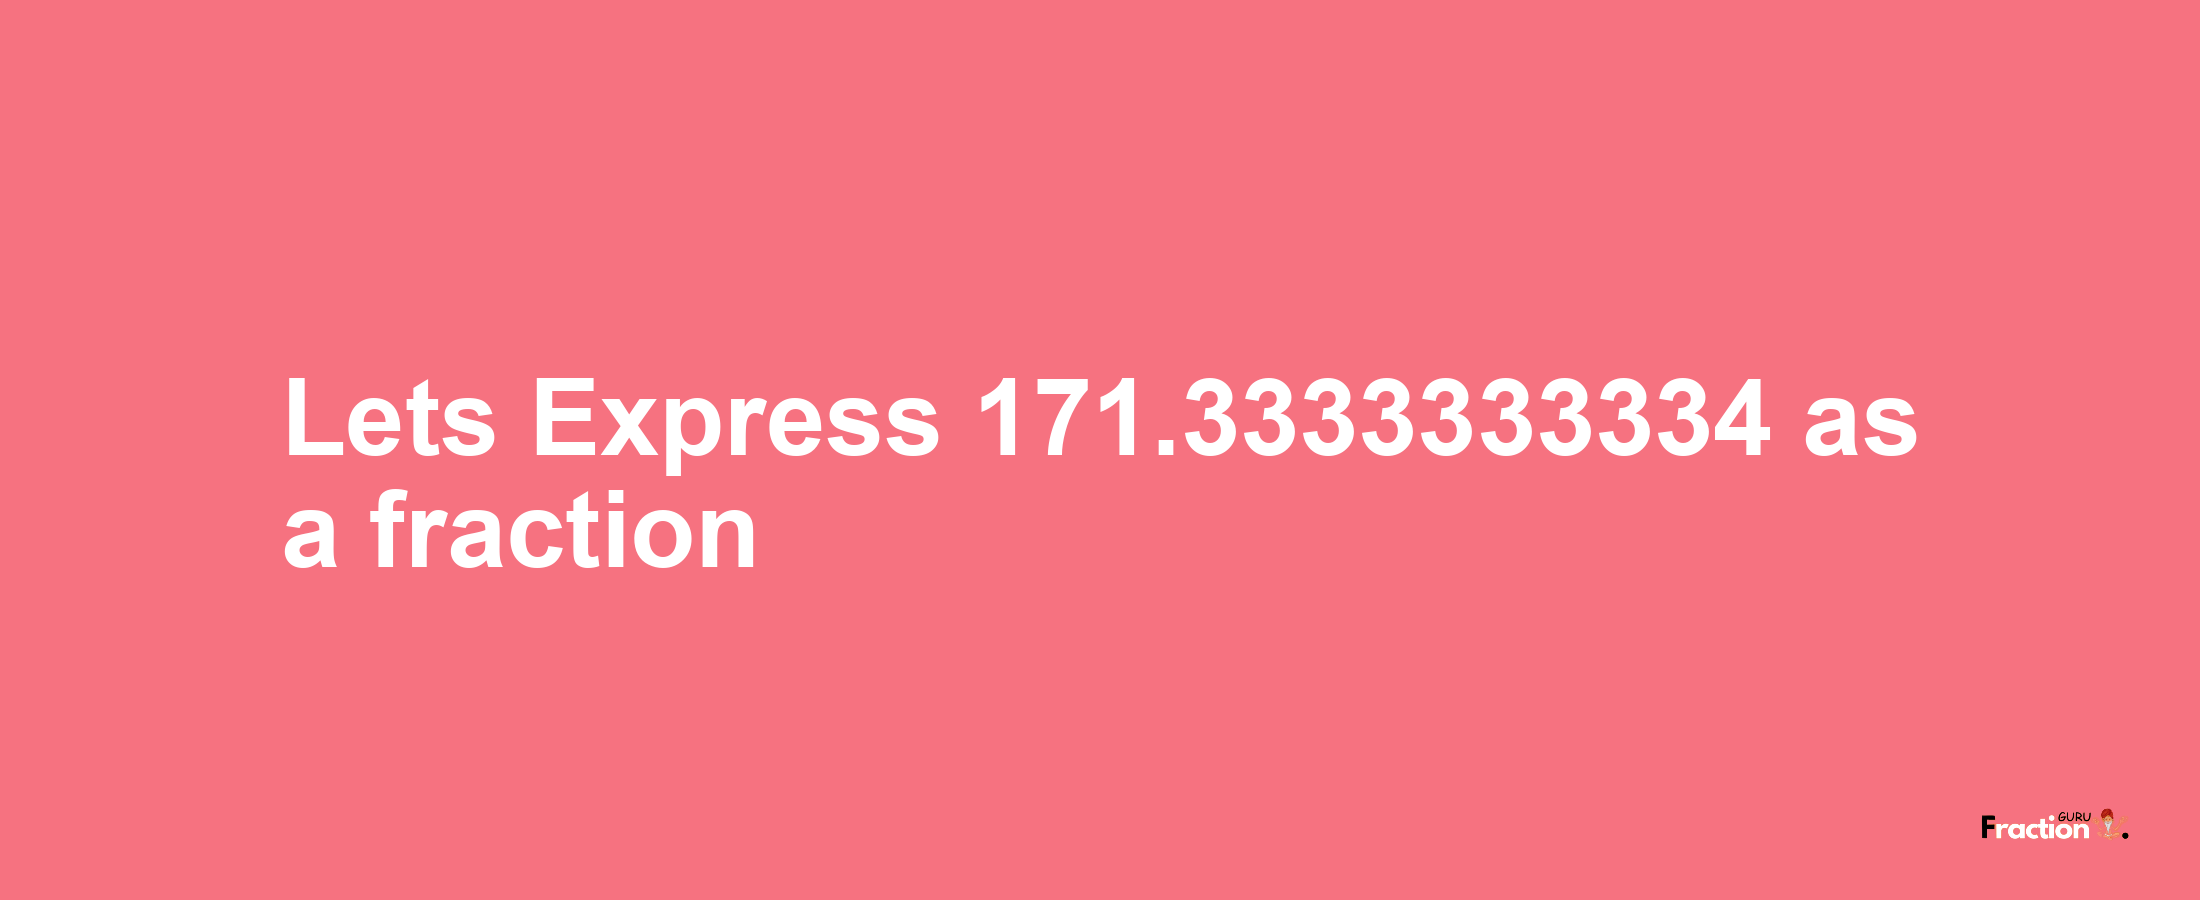 Lets Express 171.3333333334 as afraction